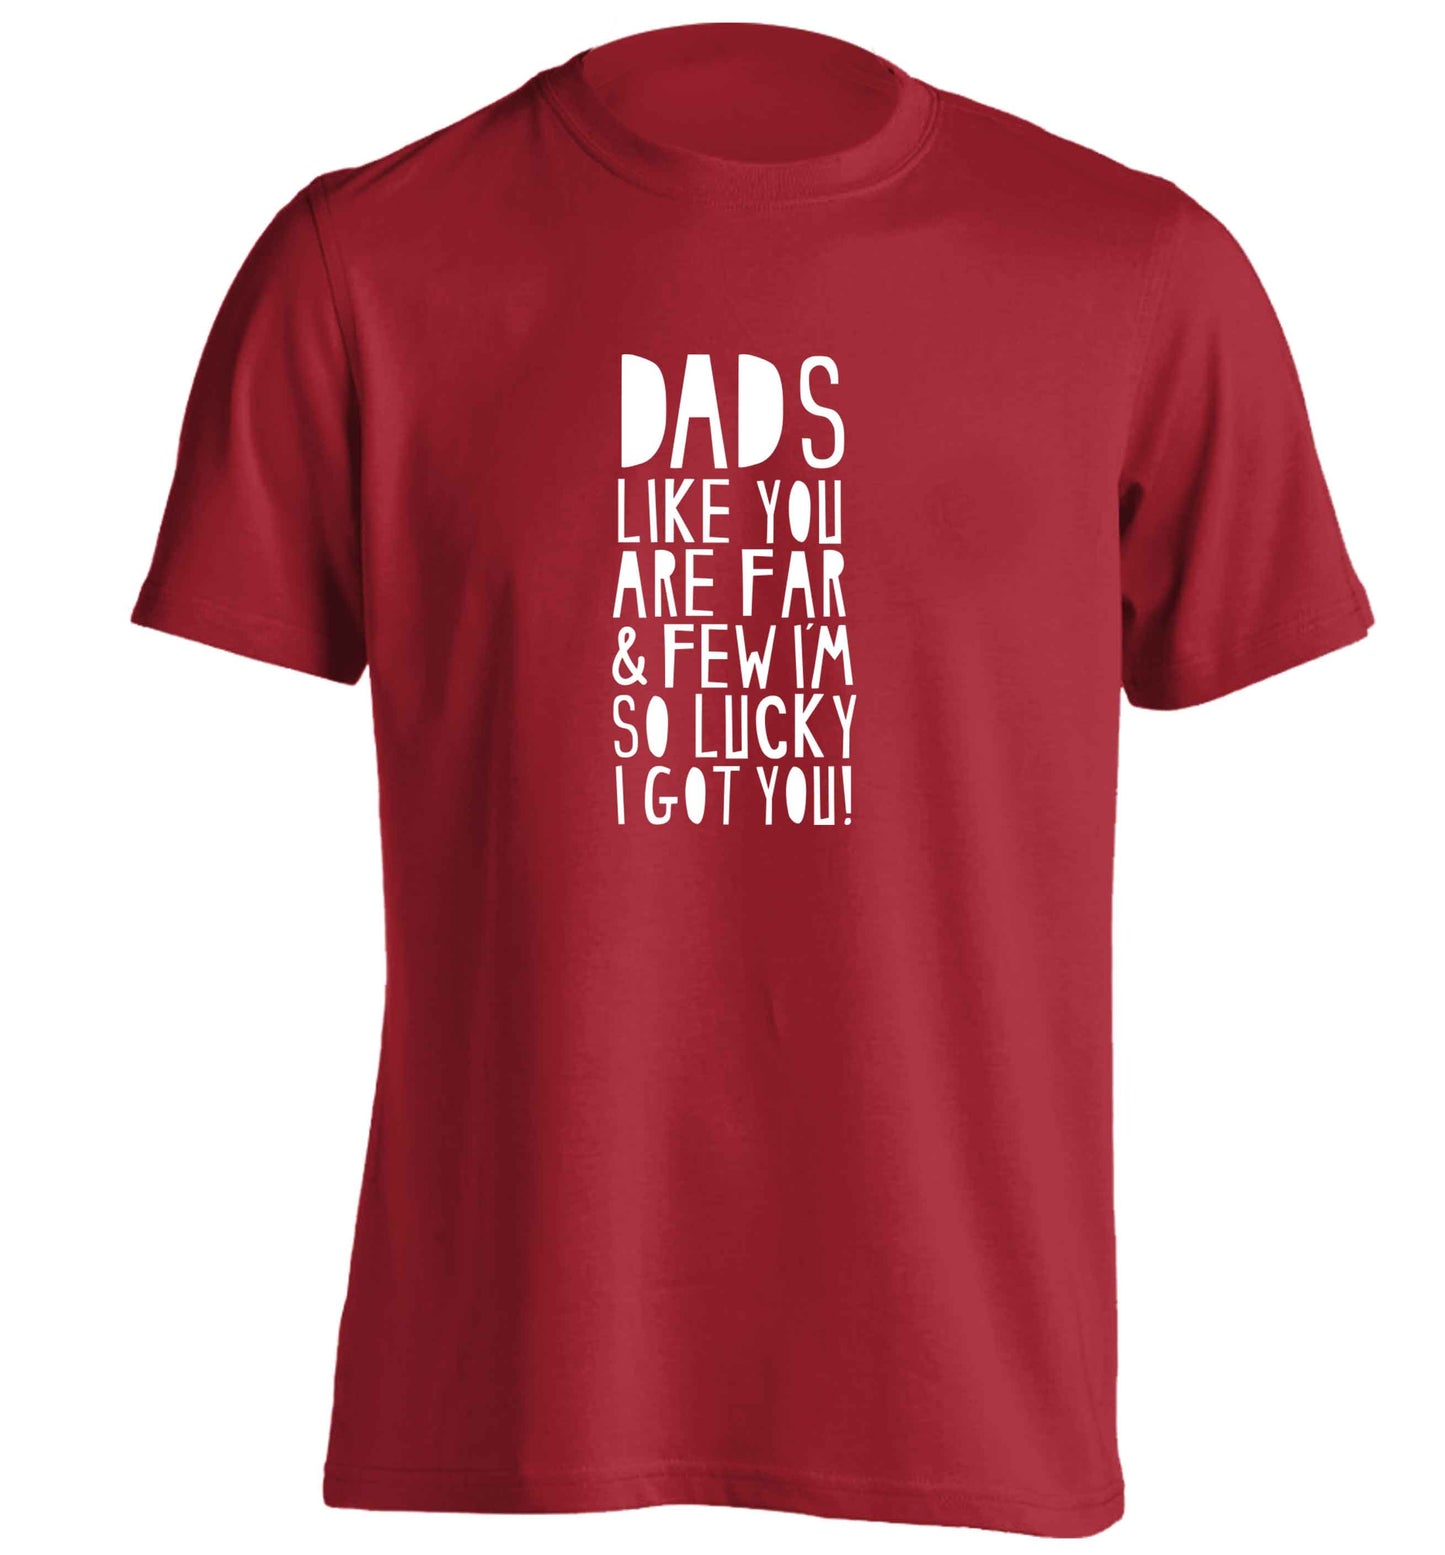 Dads like you are far and few I'm so luck I got you! adults unisex red Tshirt 2XL